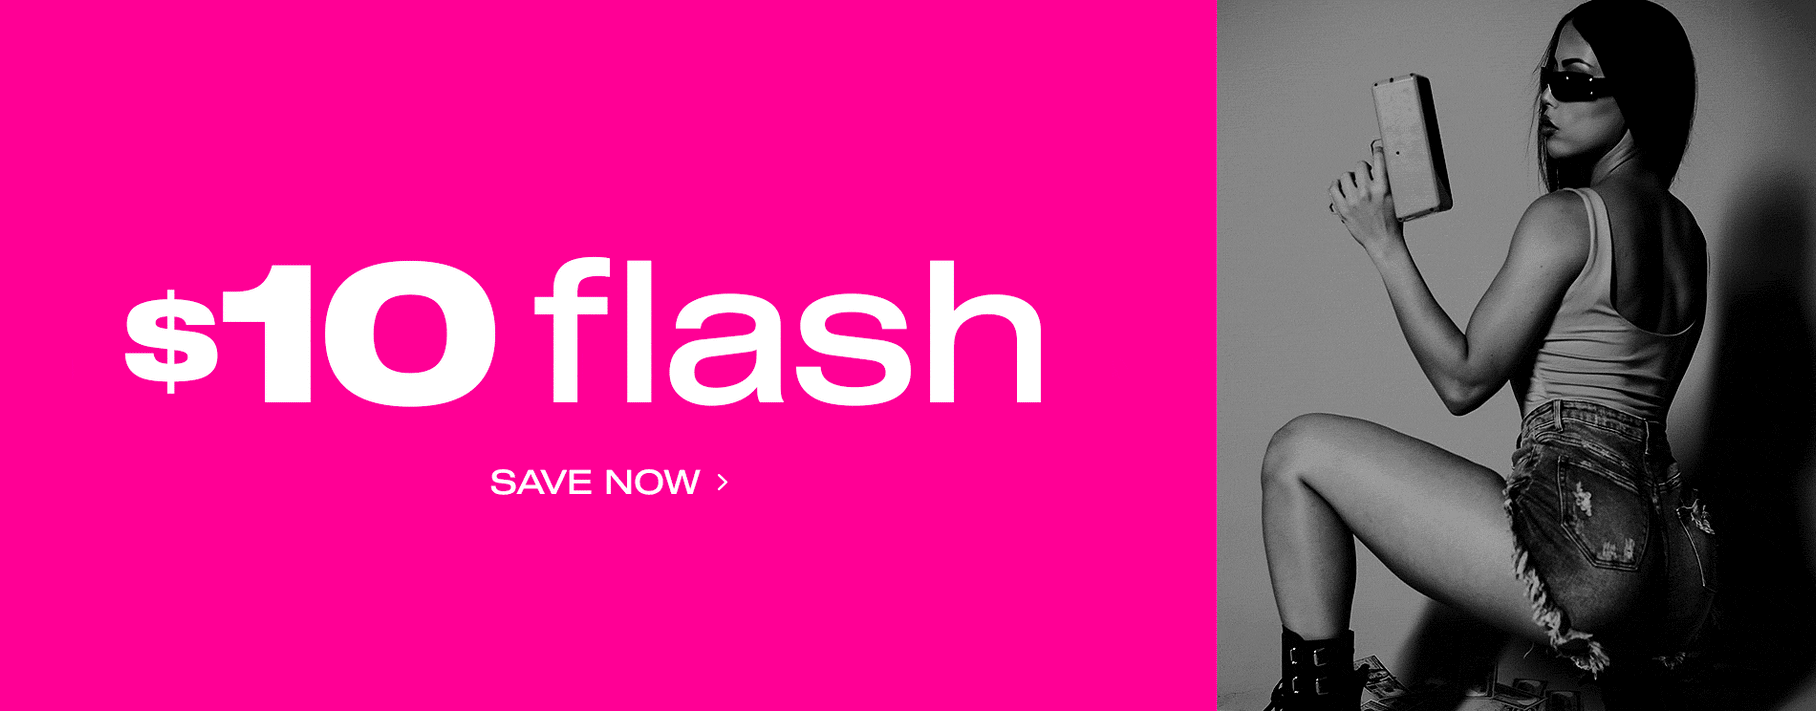 $10 Flash: Save Now